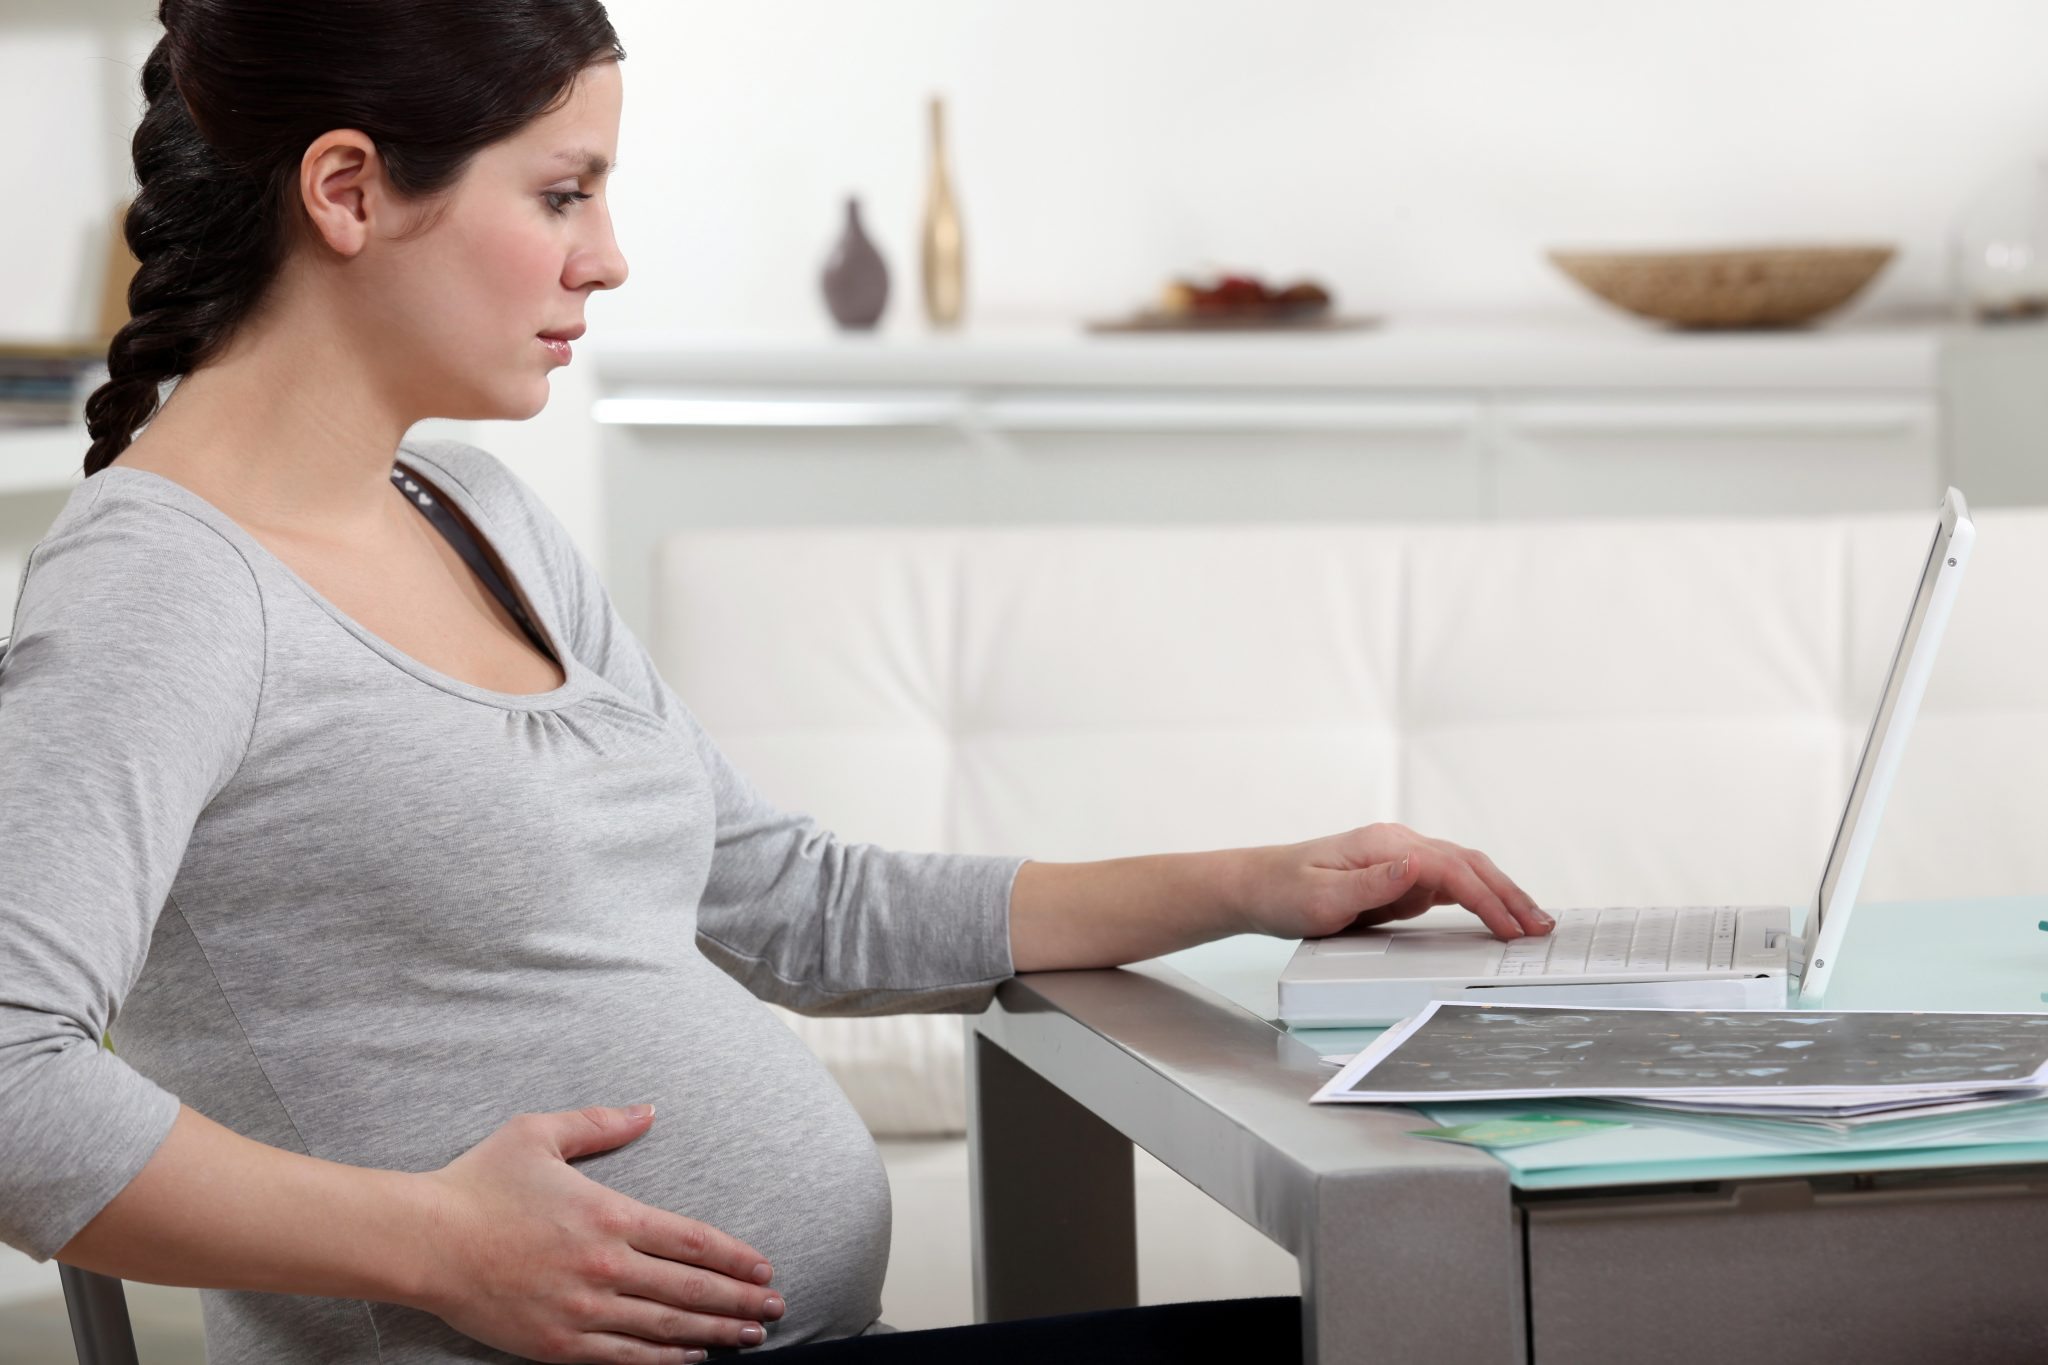 Expectant mother looking up labor fears